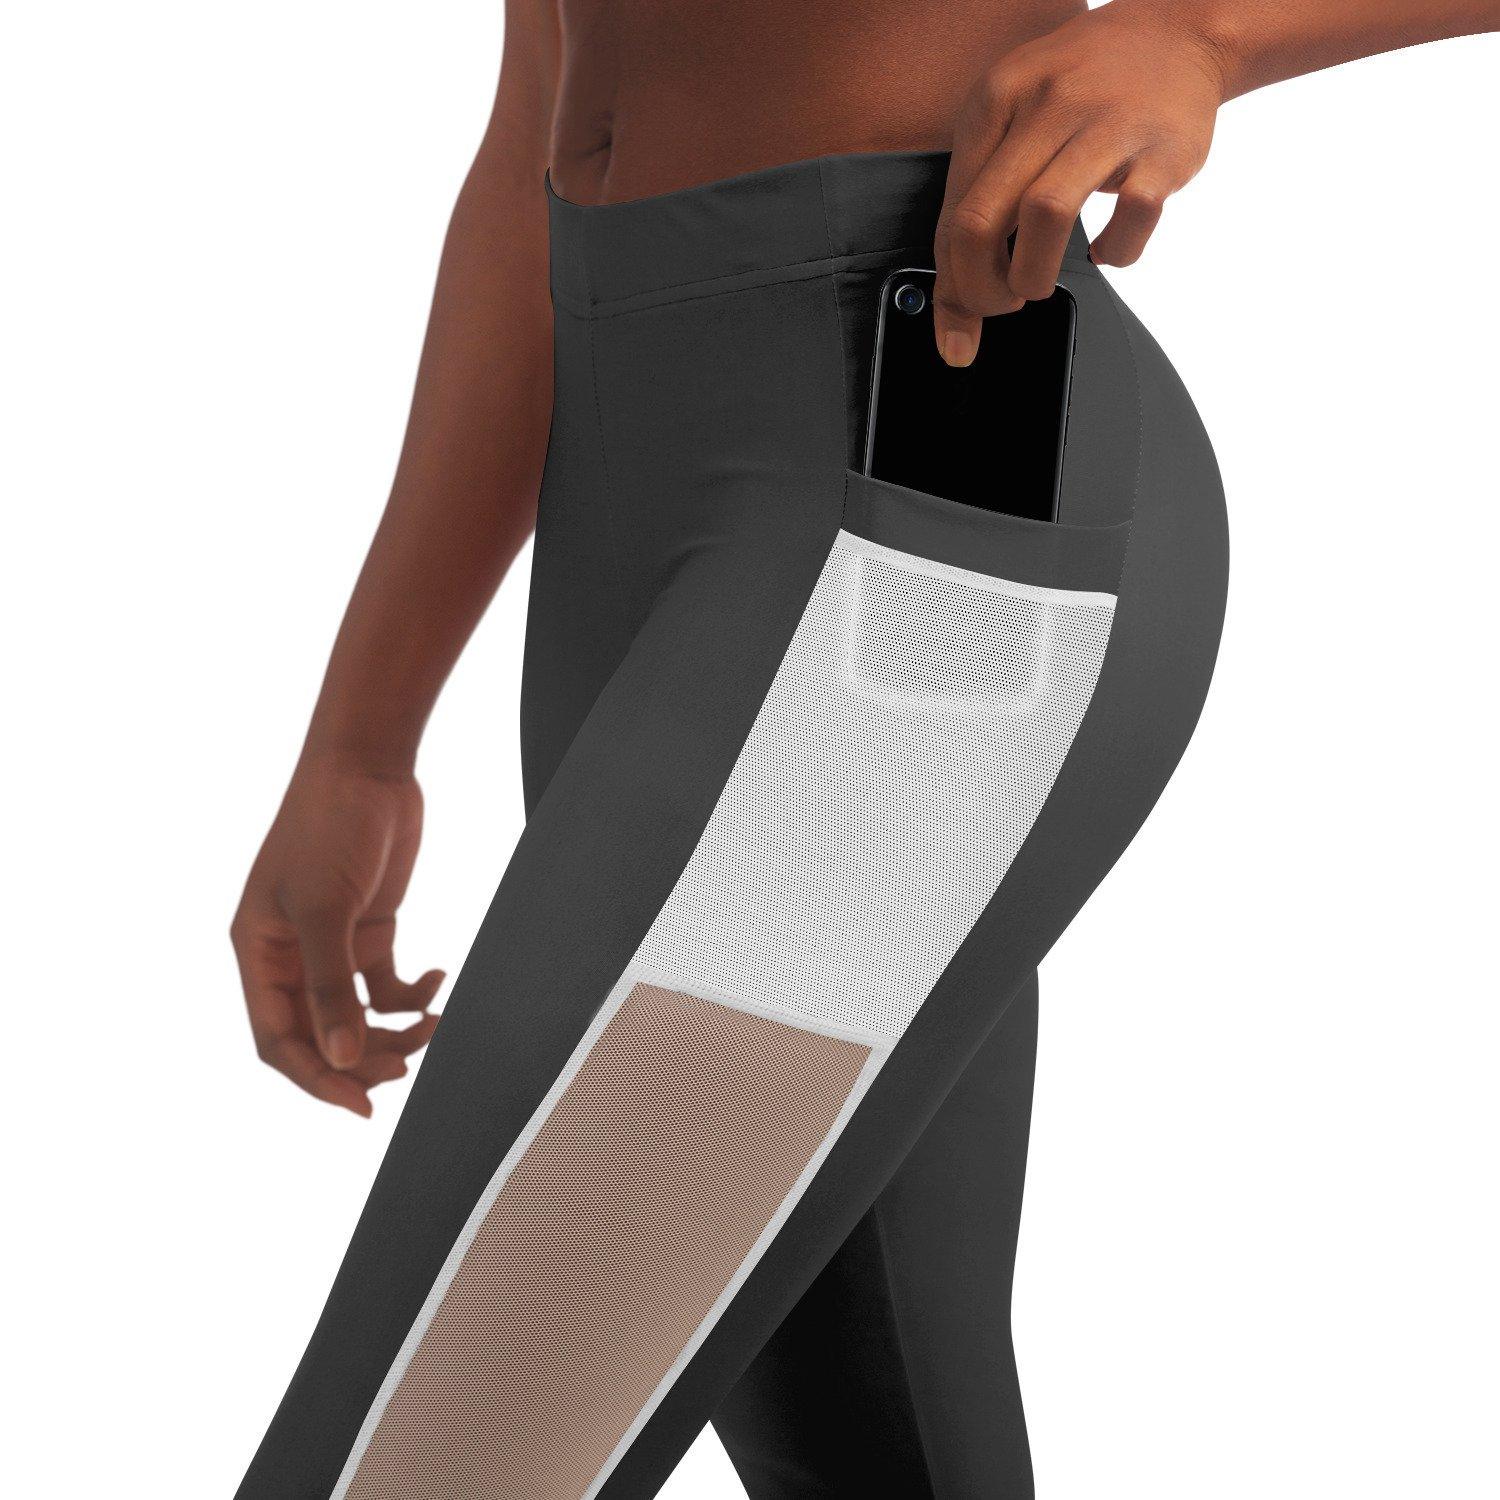 90 Degree Yoga Leggings with Pockets  - Gray and White -  Yoga Pants with Mesh Style Pocket - Personal Hour for Yoga and Meditations 